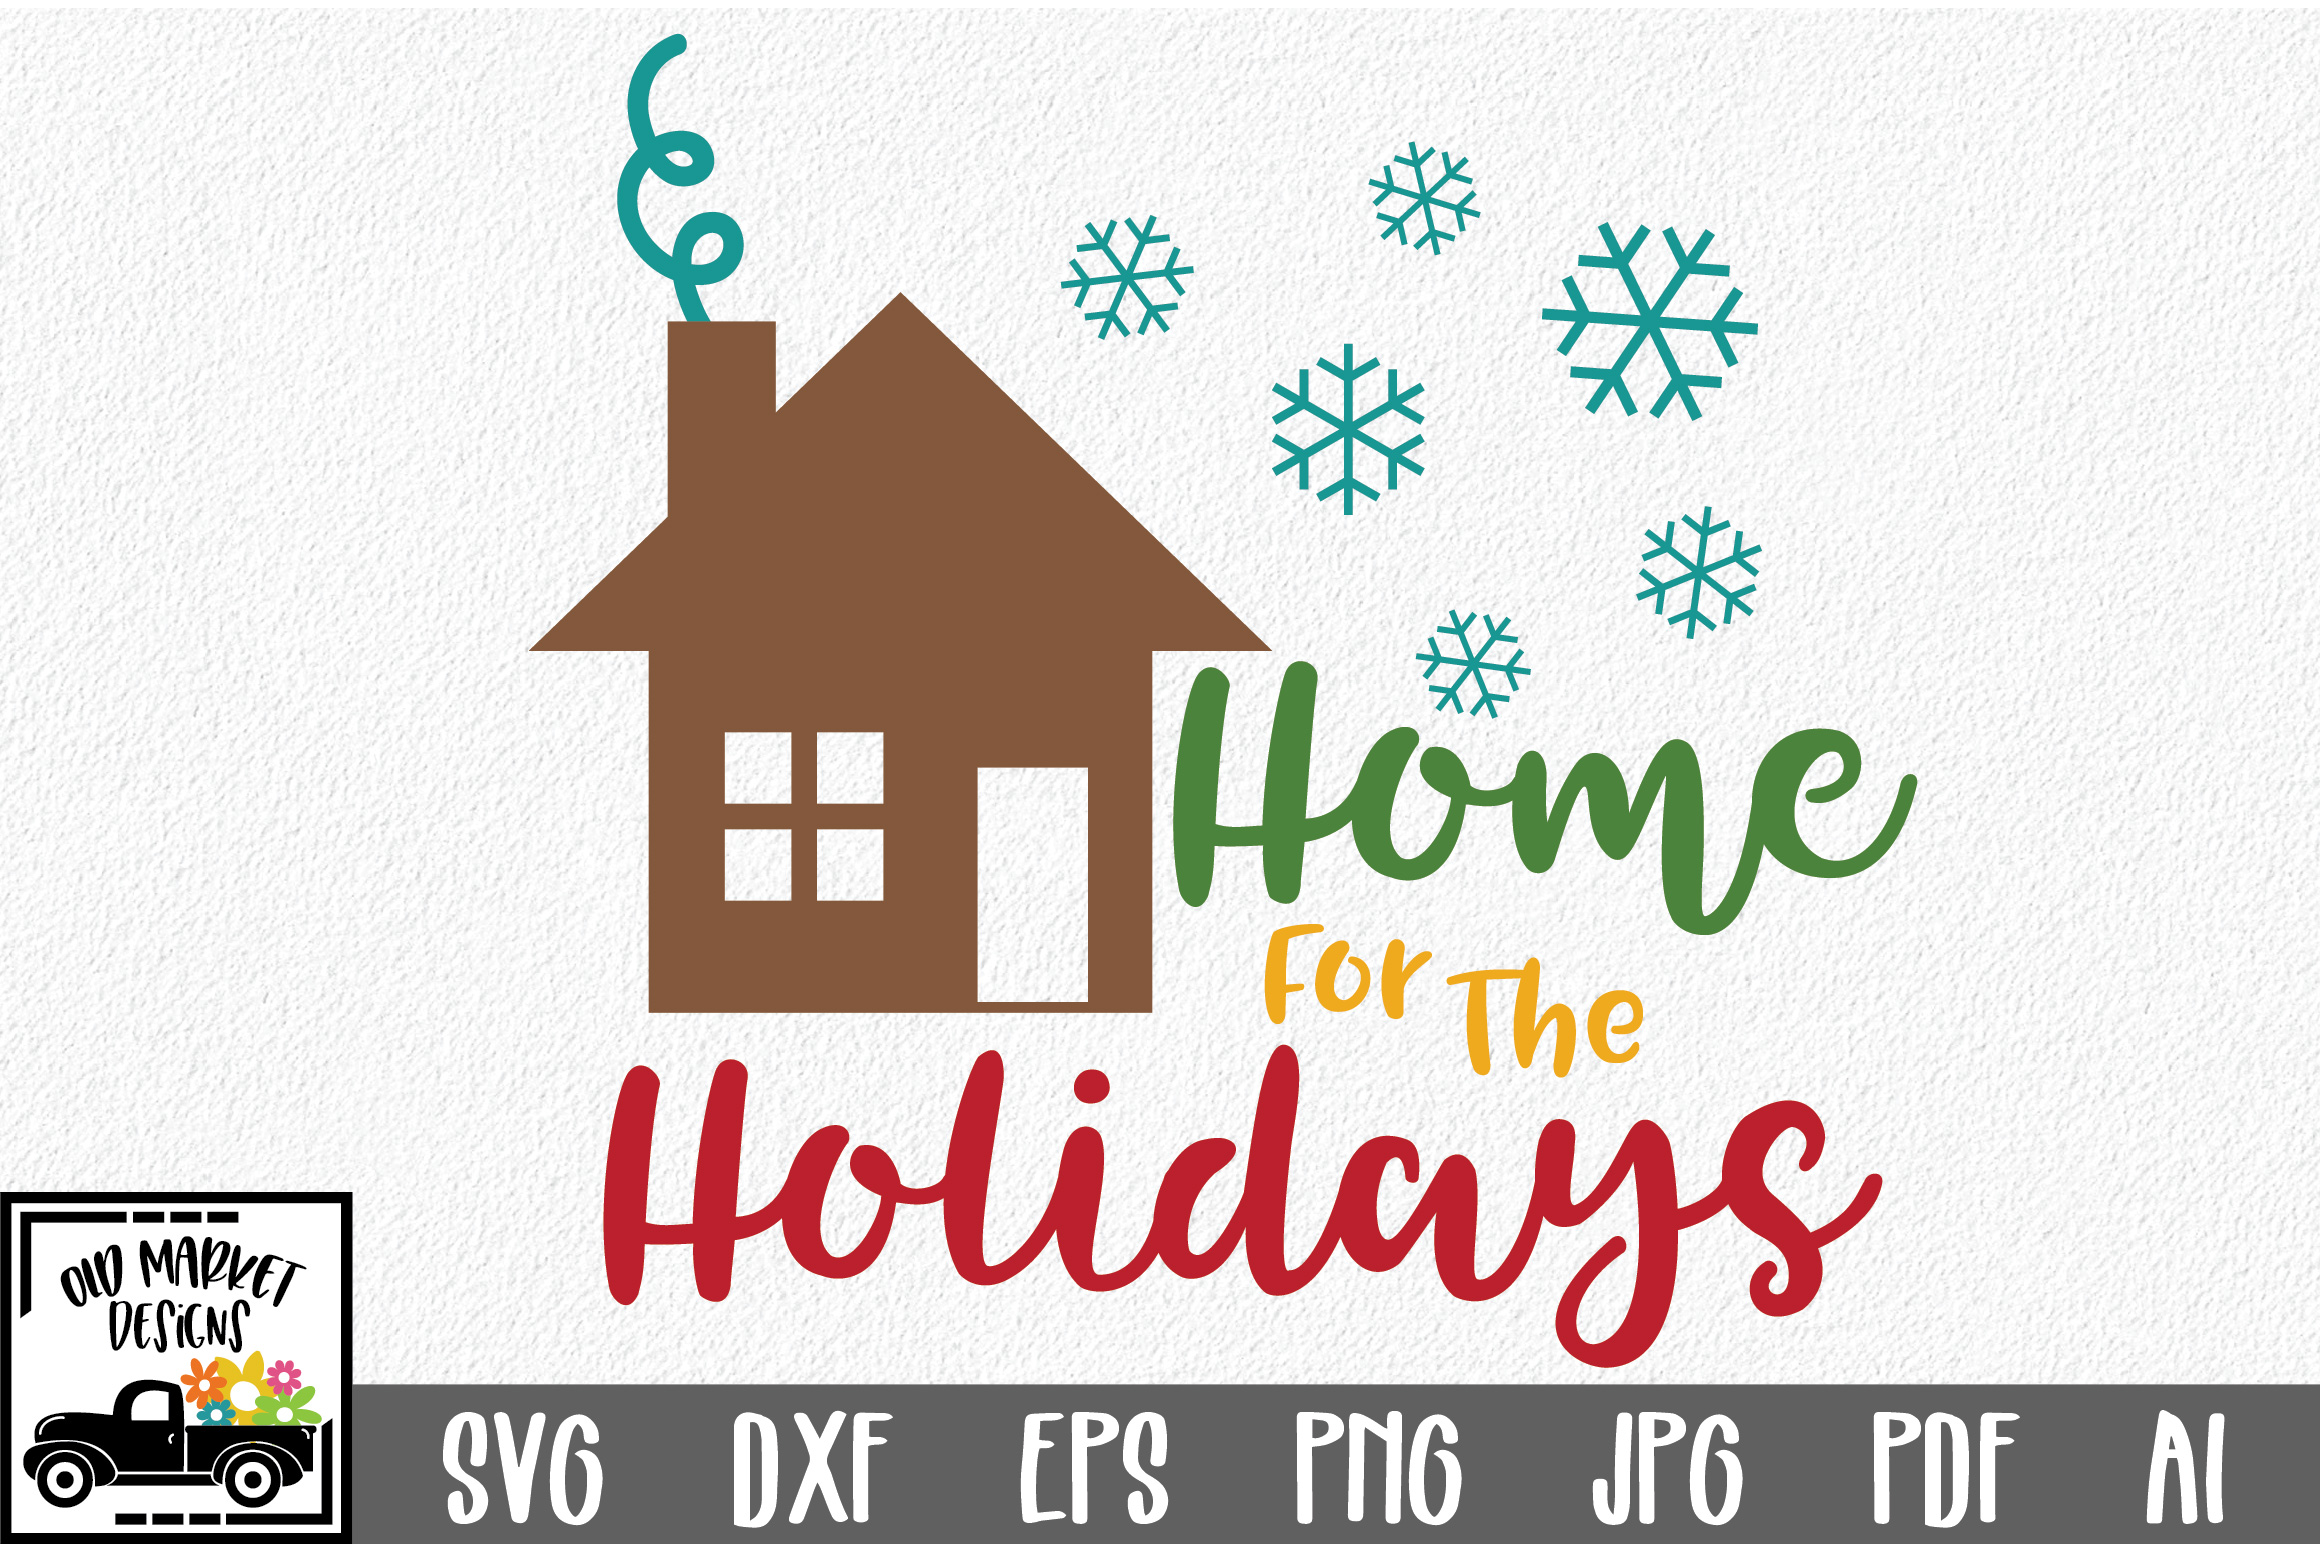 Download Home for the Holidays - Christmas SVG Cut File - DXF PNG EPS